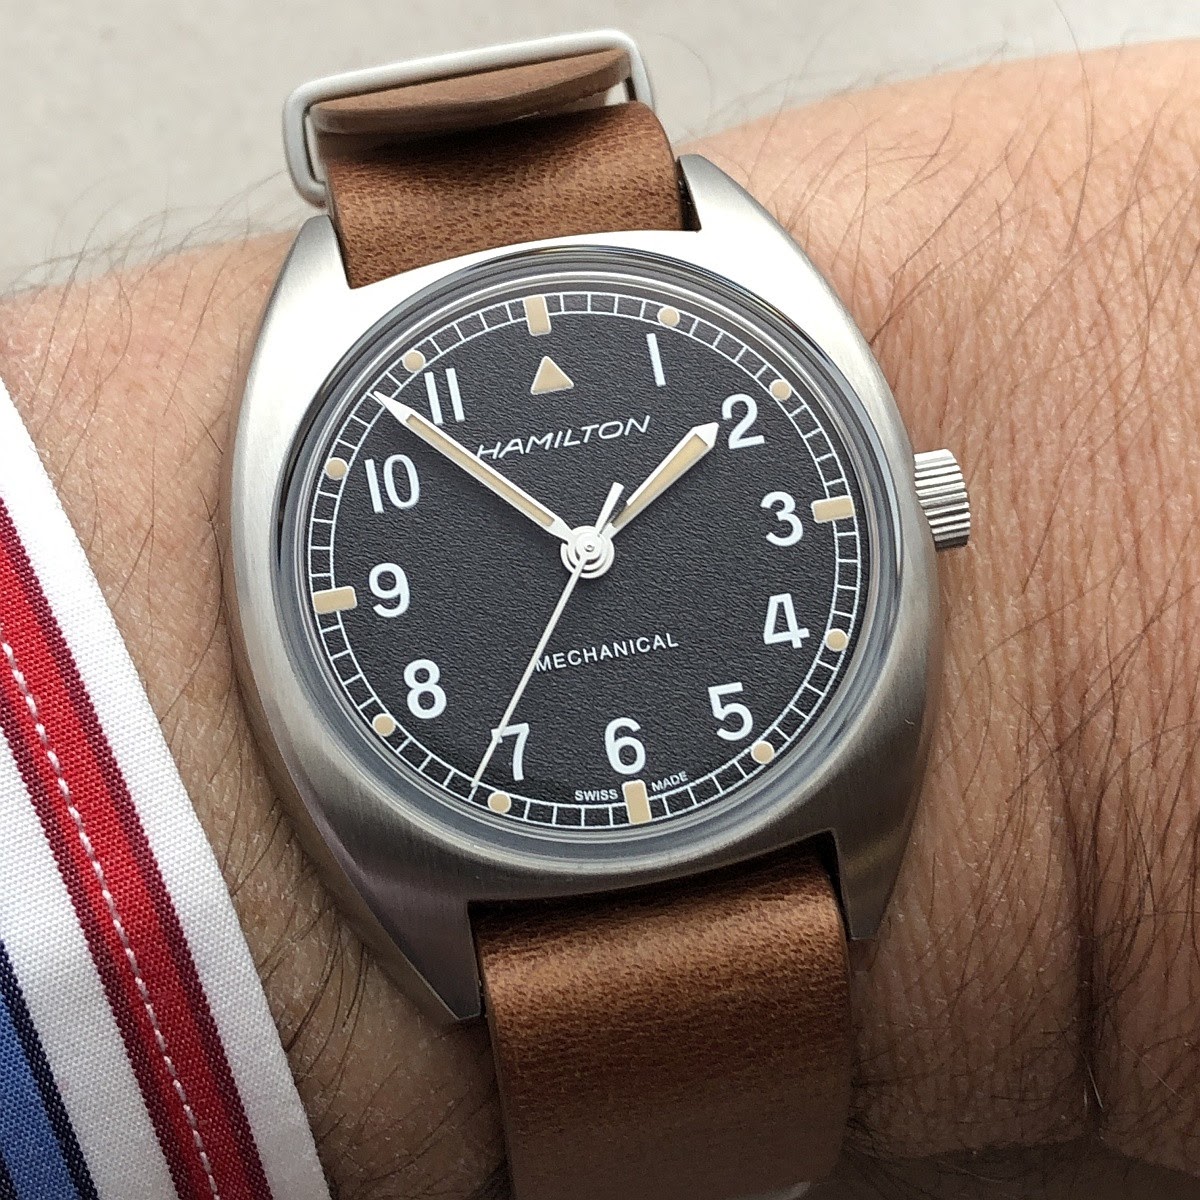 Hands on review of the Hamilton Khaki Aviation Pilot Pioneer Mechanical